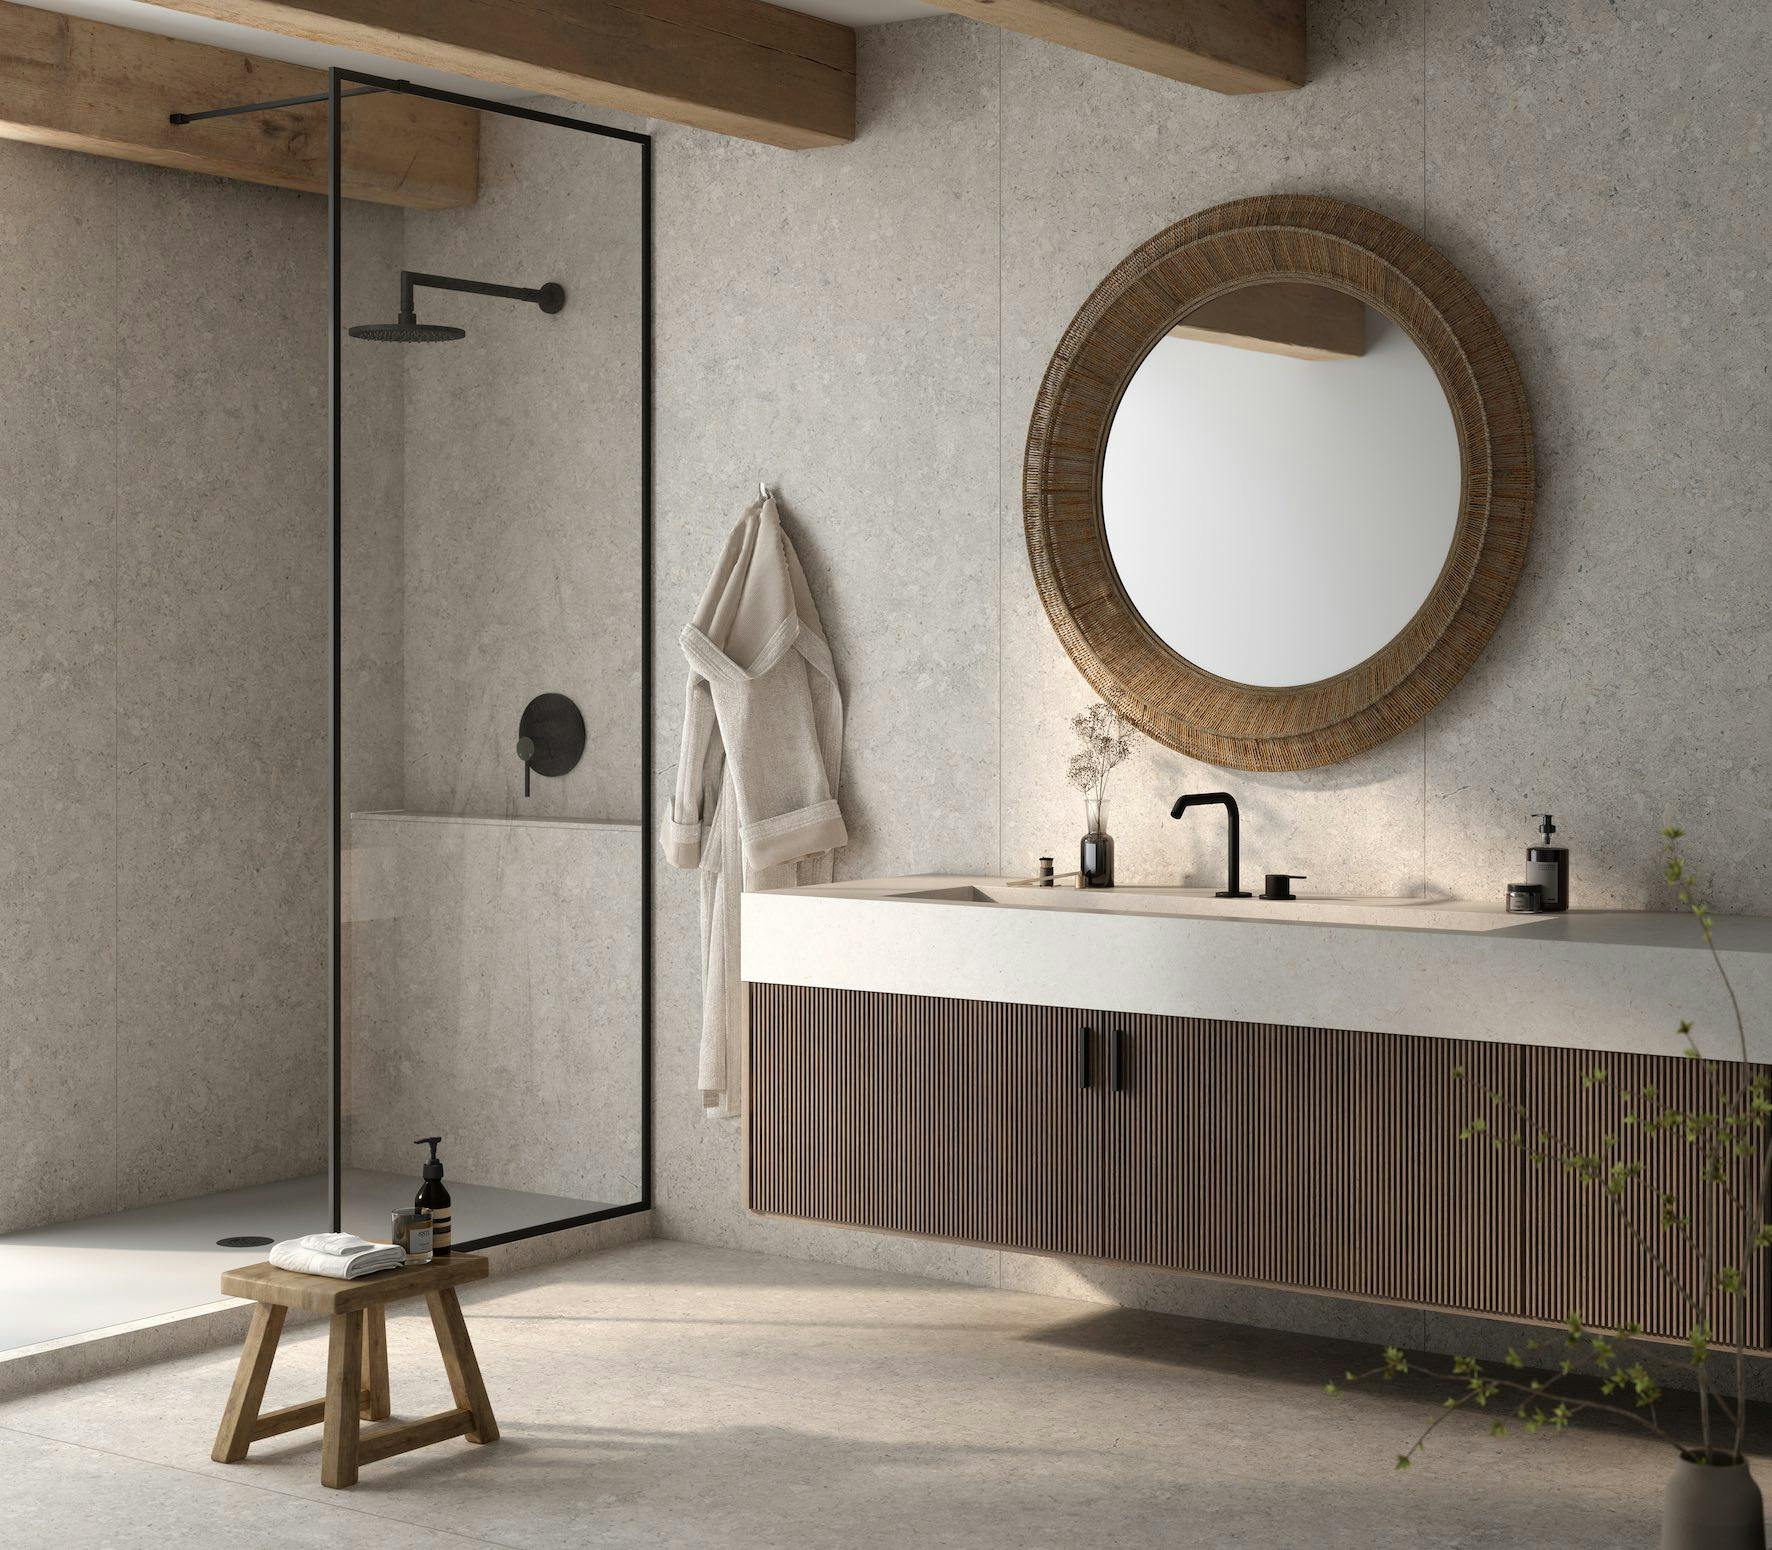 Wellness at the heart of the bathroom: create your own sanctuary